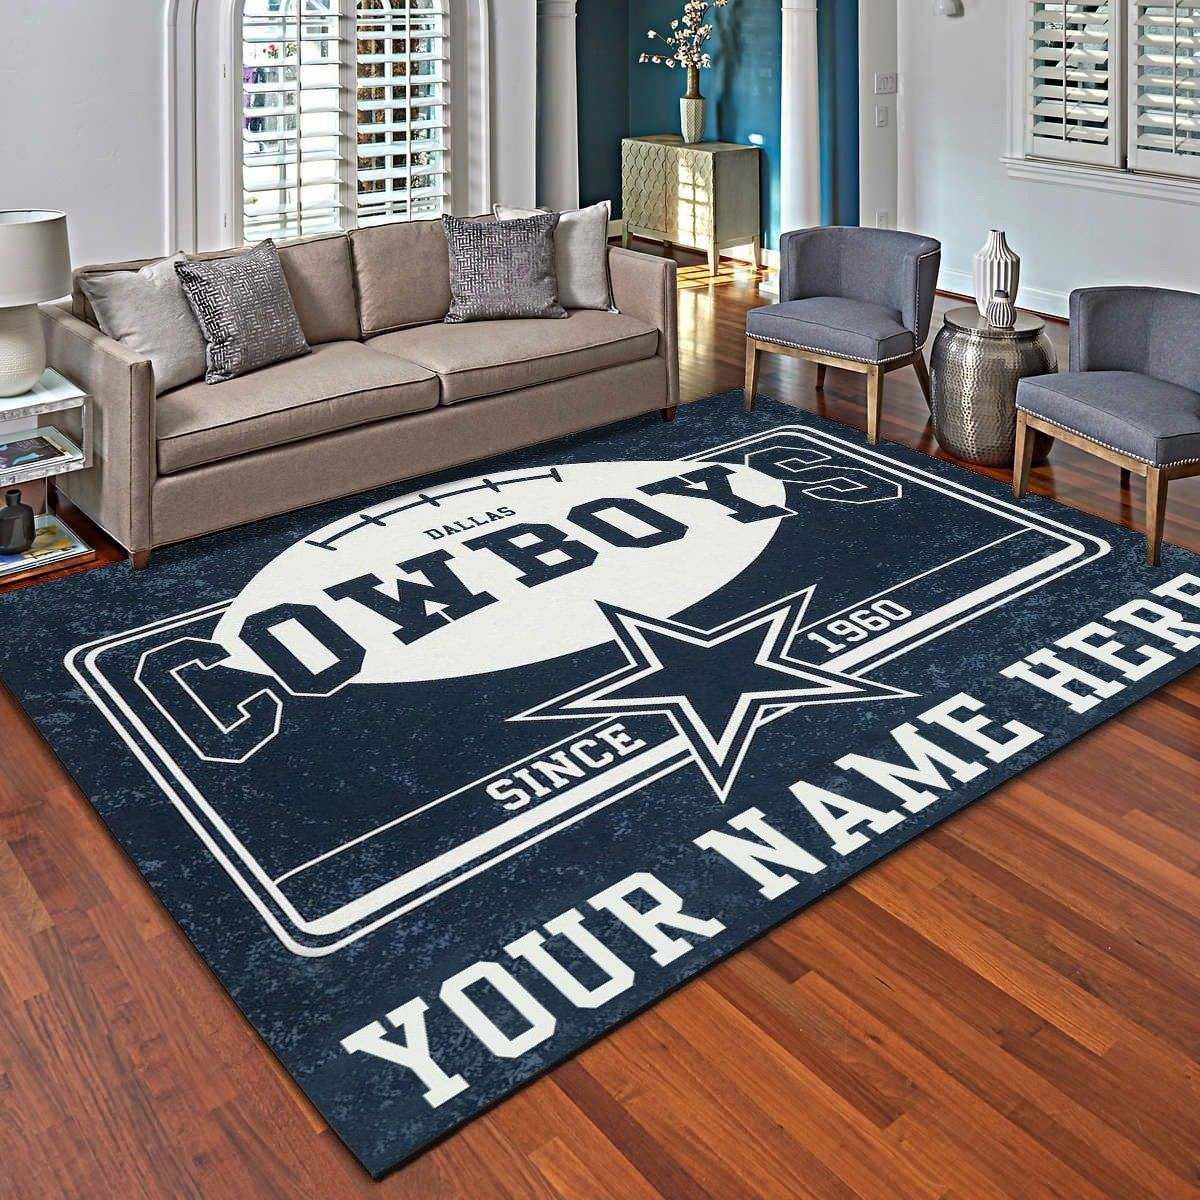 Dallas Cowboys Personalized Area Rugs, Living Room Carpet – Customized Fan Cave Floor Mat